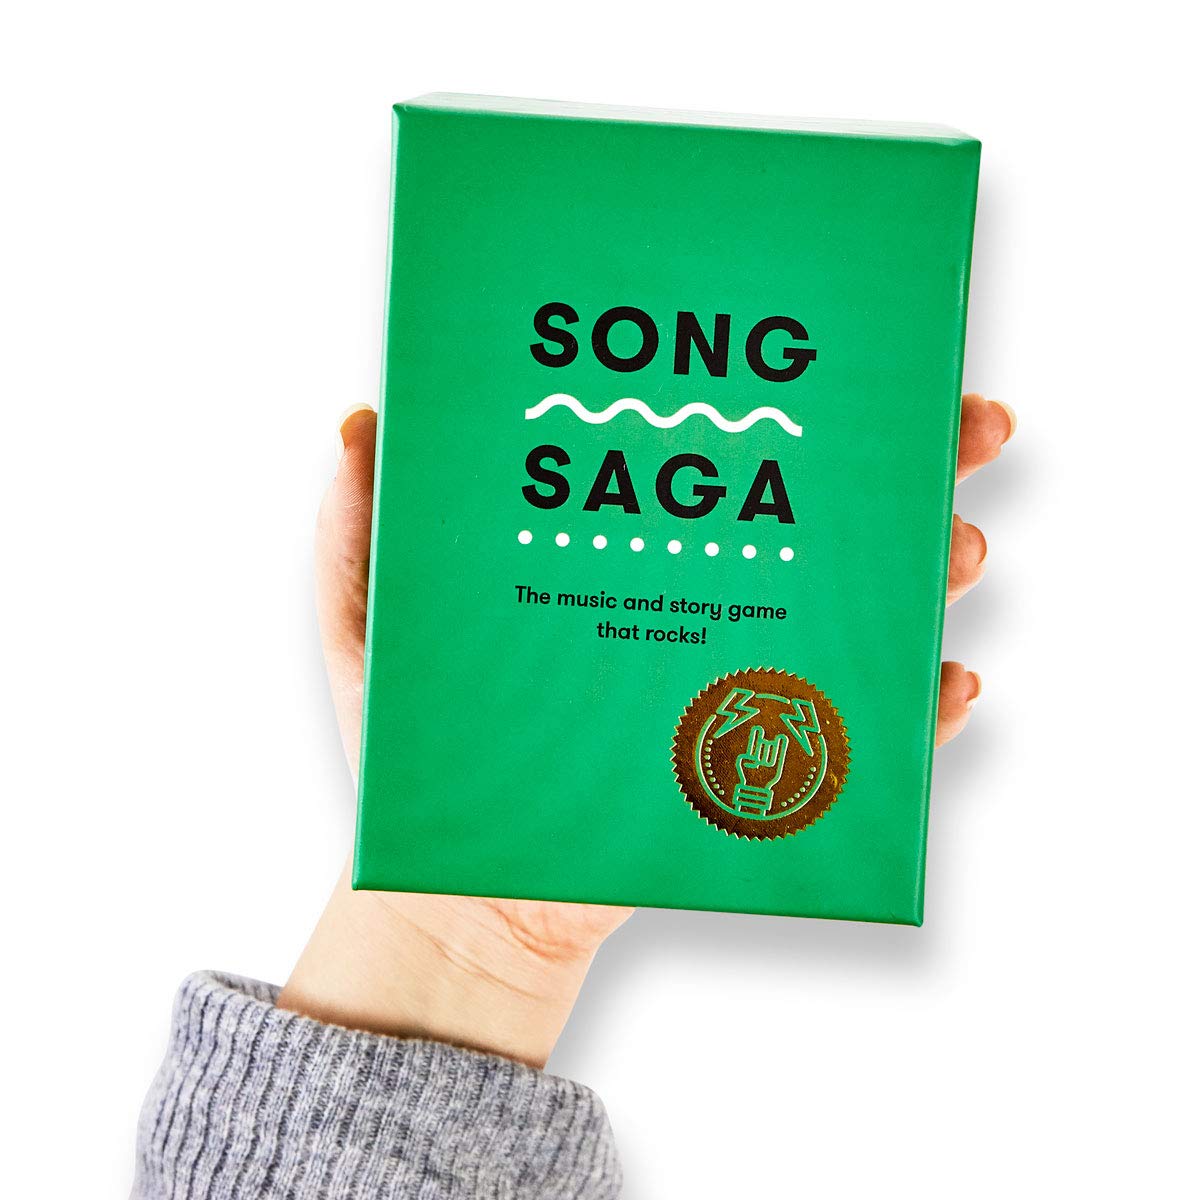 Song Saga is The Music and Memory Game That Rocks!  Share The Stories and Soundtrack of Your Life and Discover New Things About Everyone You Play with. No Singing Required.